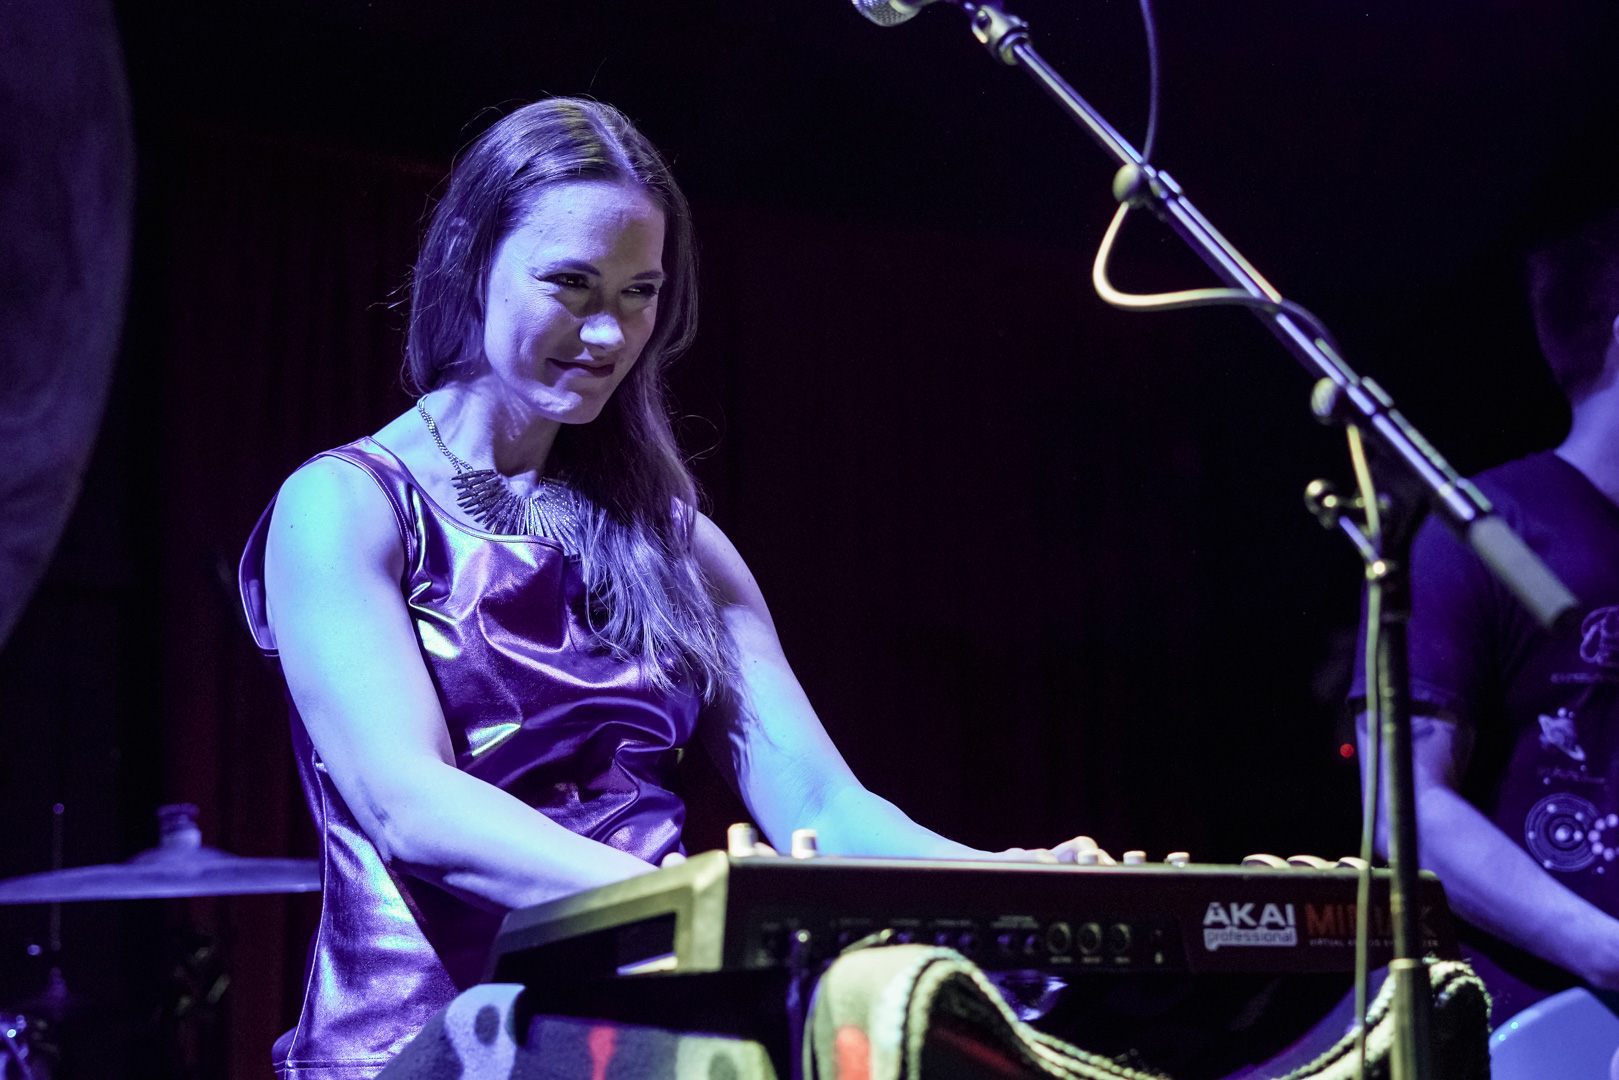 A woman smiles and plays keys